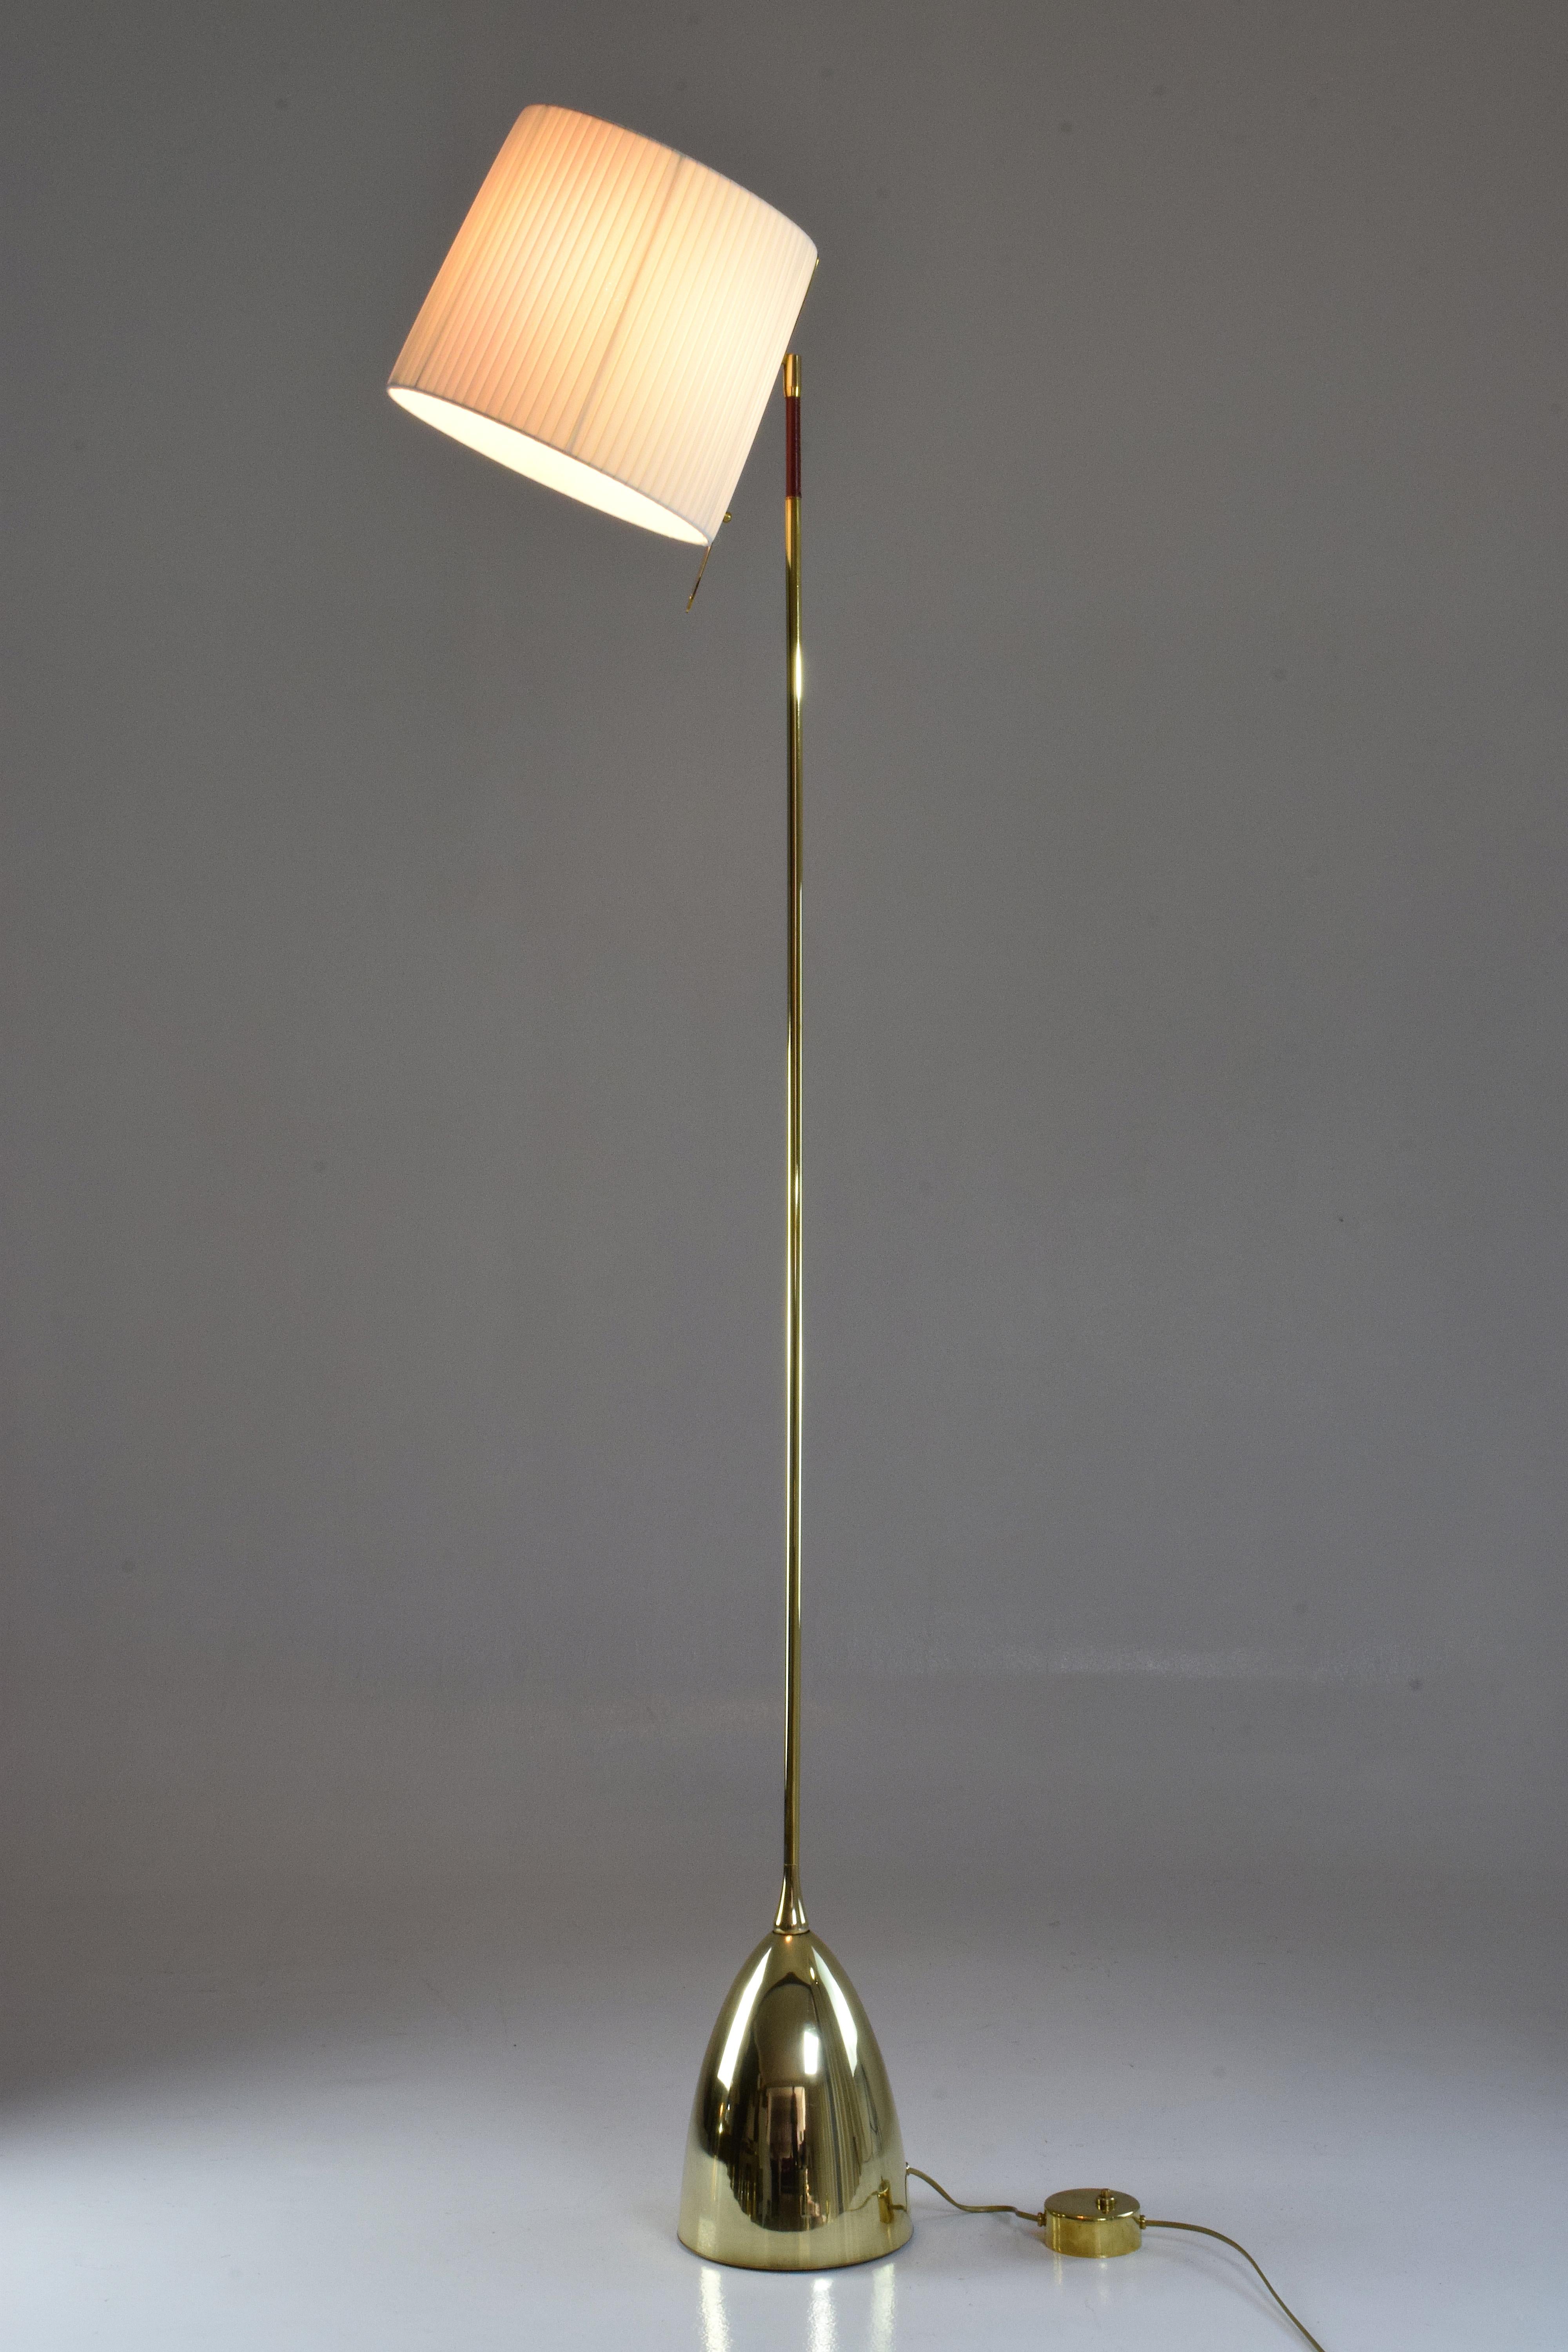 Contemporary handcrafted floor lamp composed of a solid polished brass structure with a hand braided leather design, handcrafted by artisans saddlers, which rotates 360 degrees at the base with our signature pear shaped joint. The fabric shade